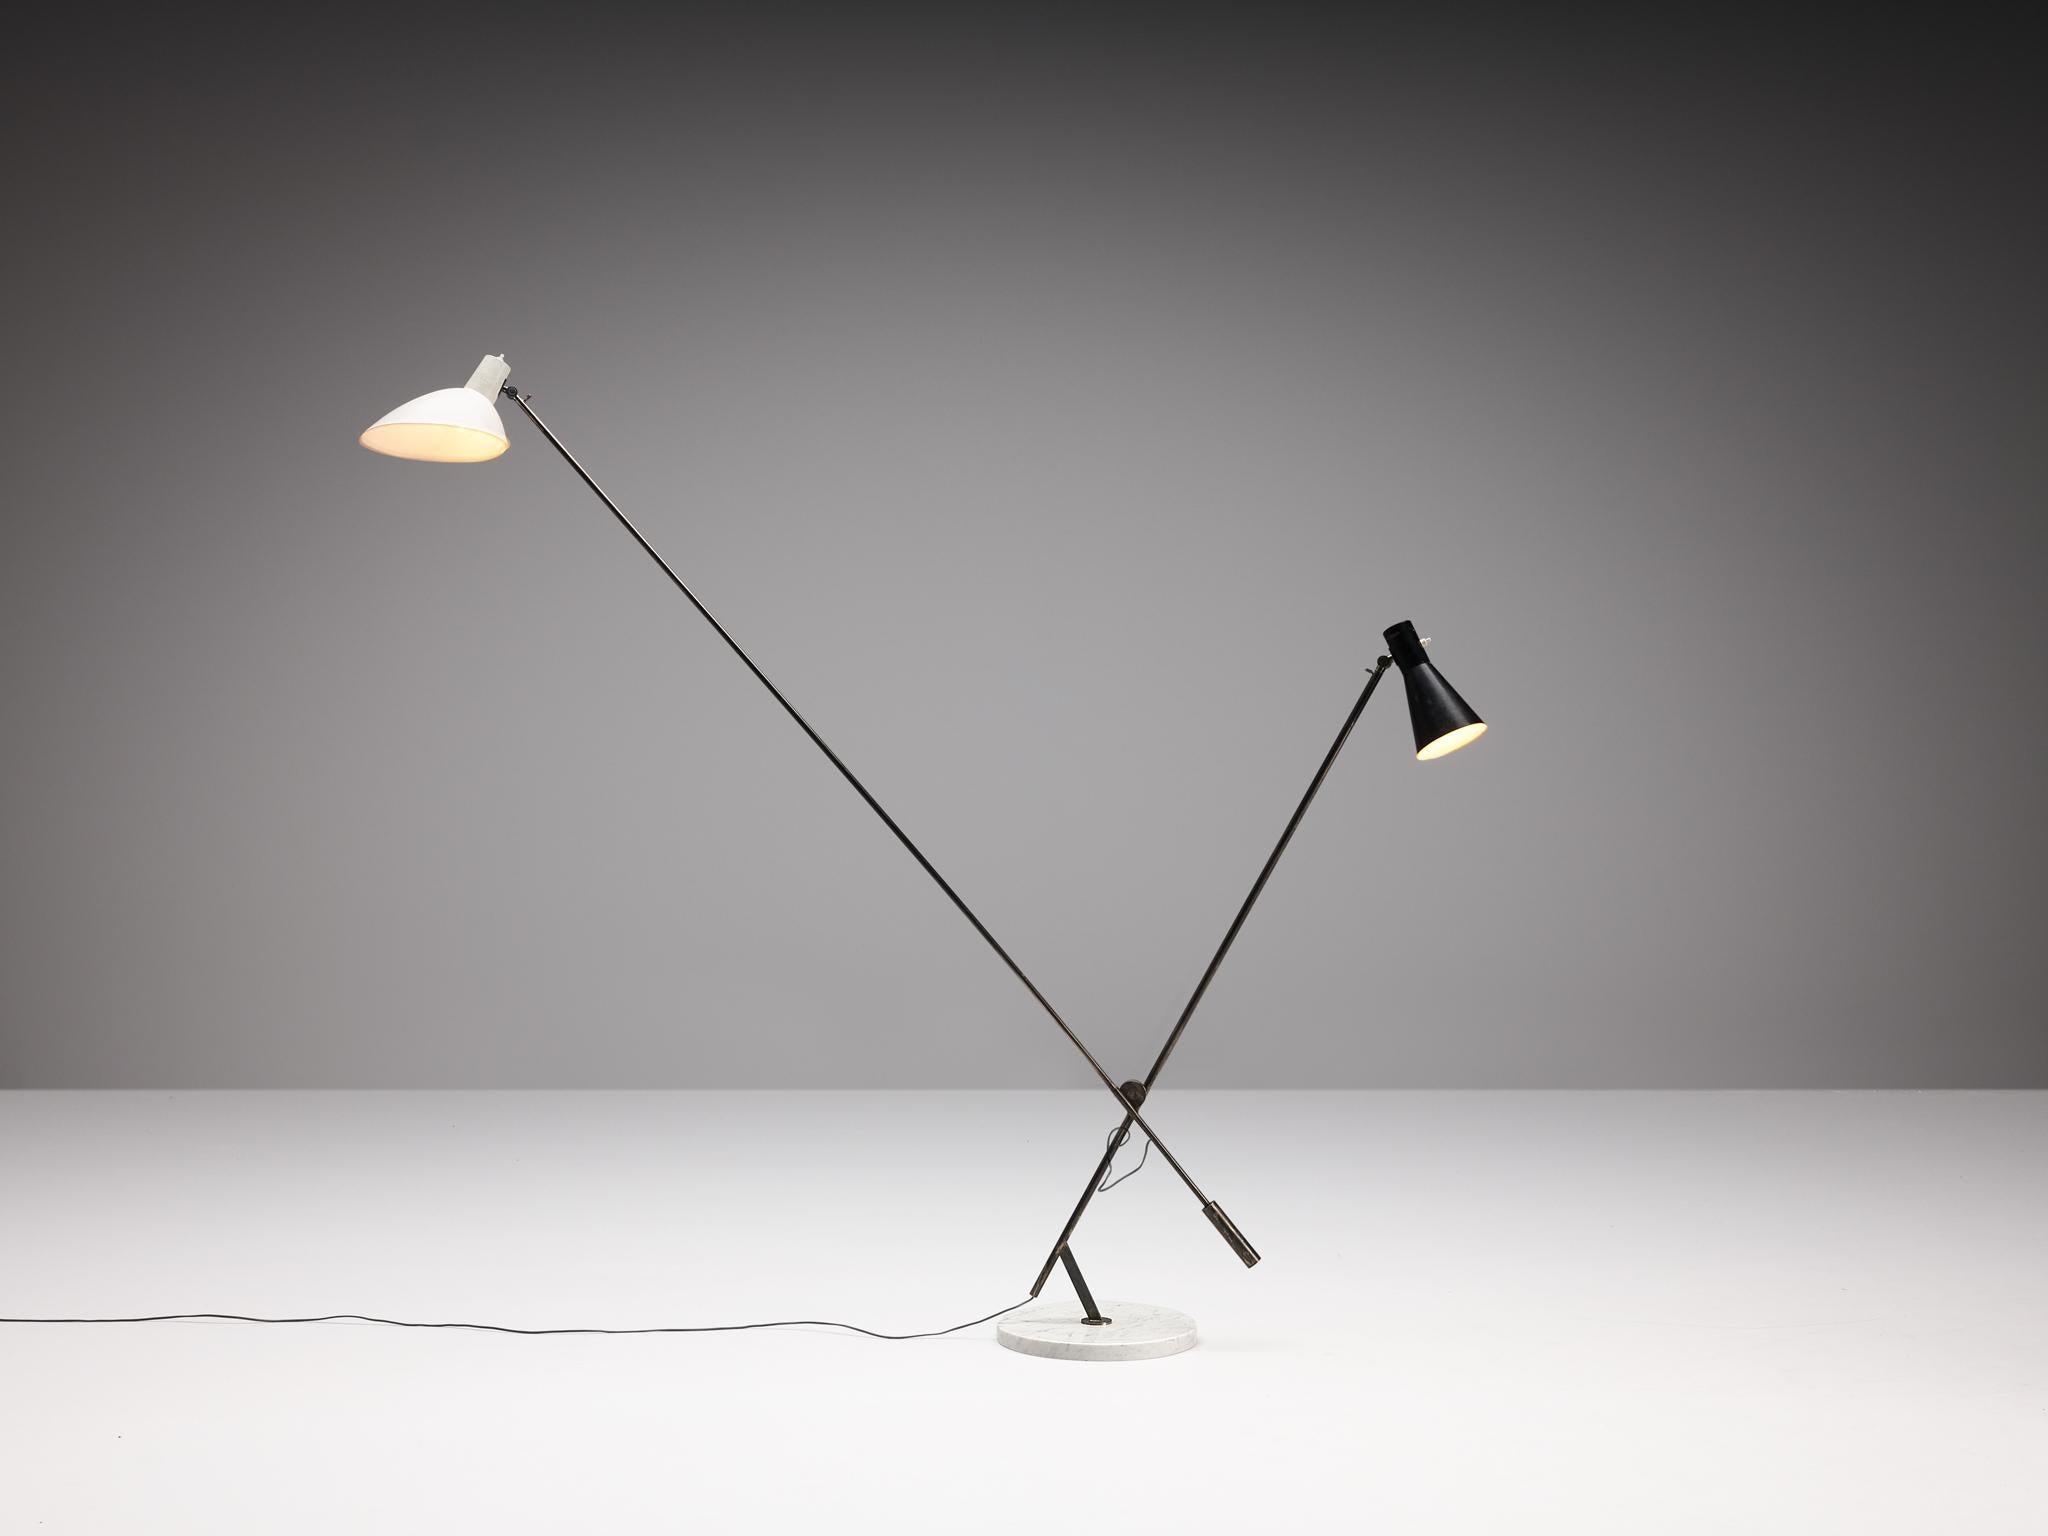 Vittoriano Vigano for Arteluce, floor Lamp, model ‘1049’, Carrara marble, brass, coated aluminum, Italy, 1951/52.

Post-war Italian designer and architect Vittoriano Vigano initially served as an artistic and technical advisor for Arteluce in